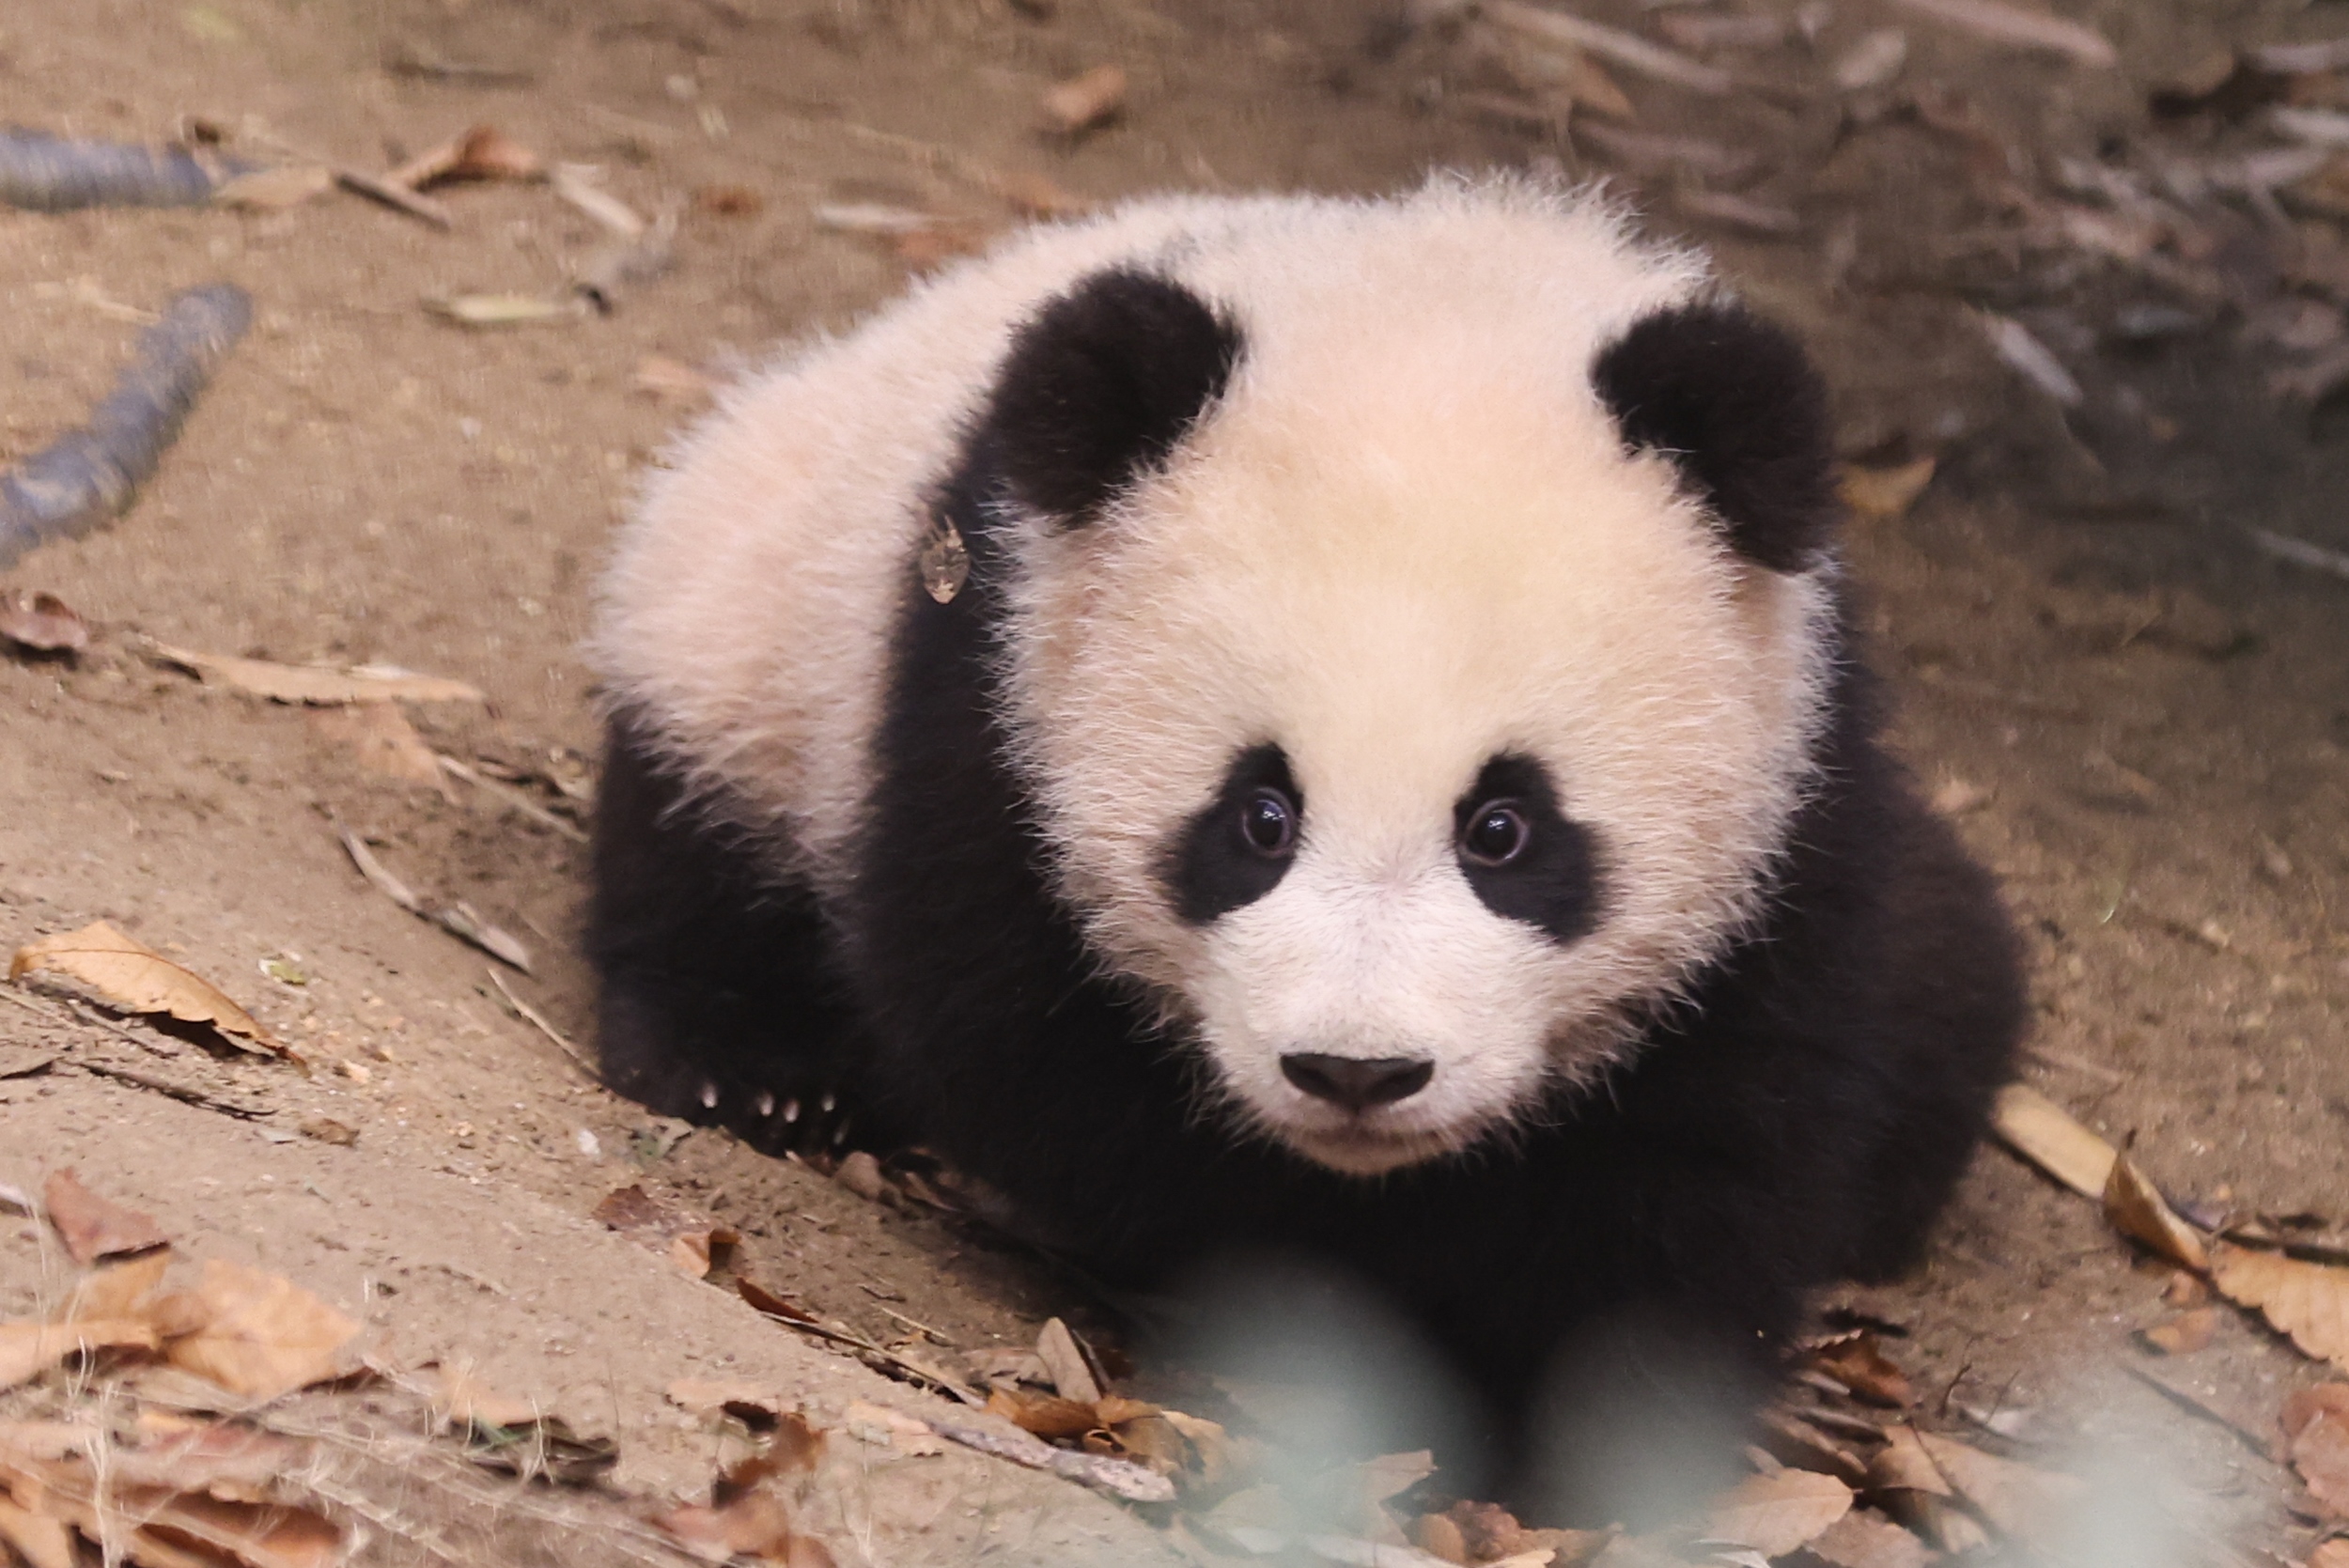 “Hello, can you guess which panda twin I am?”